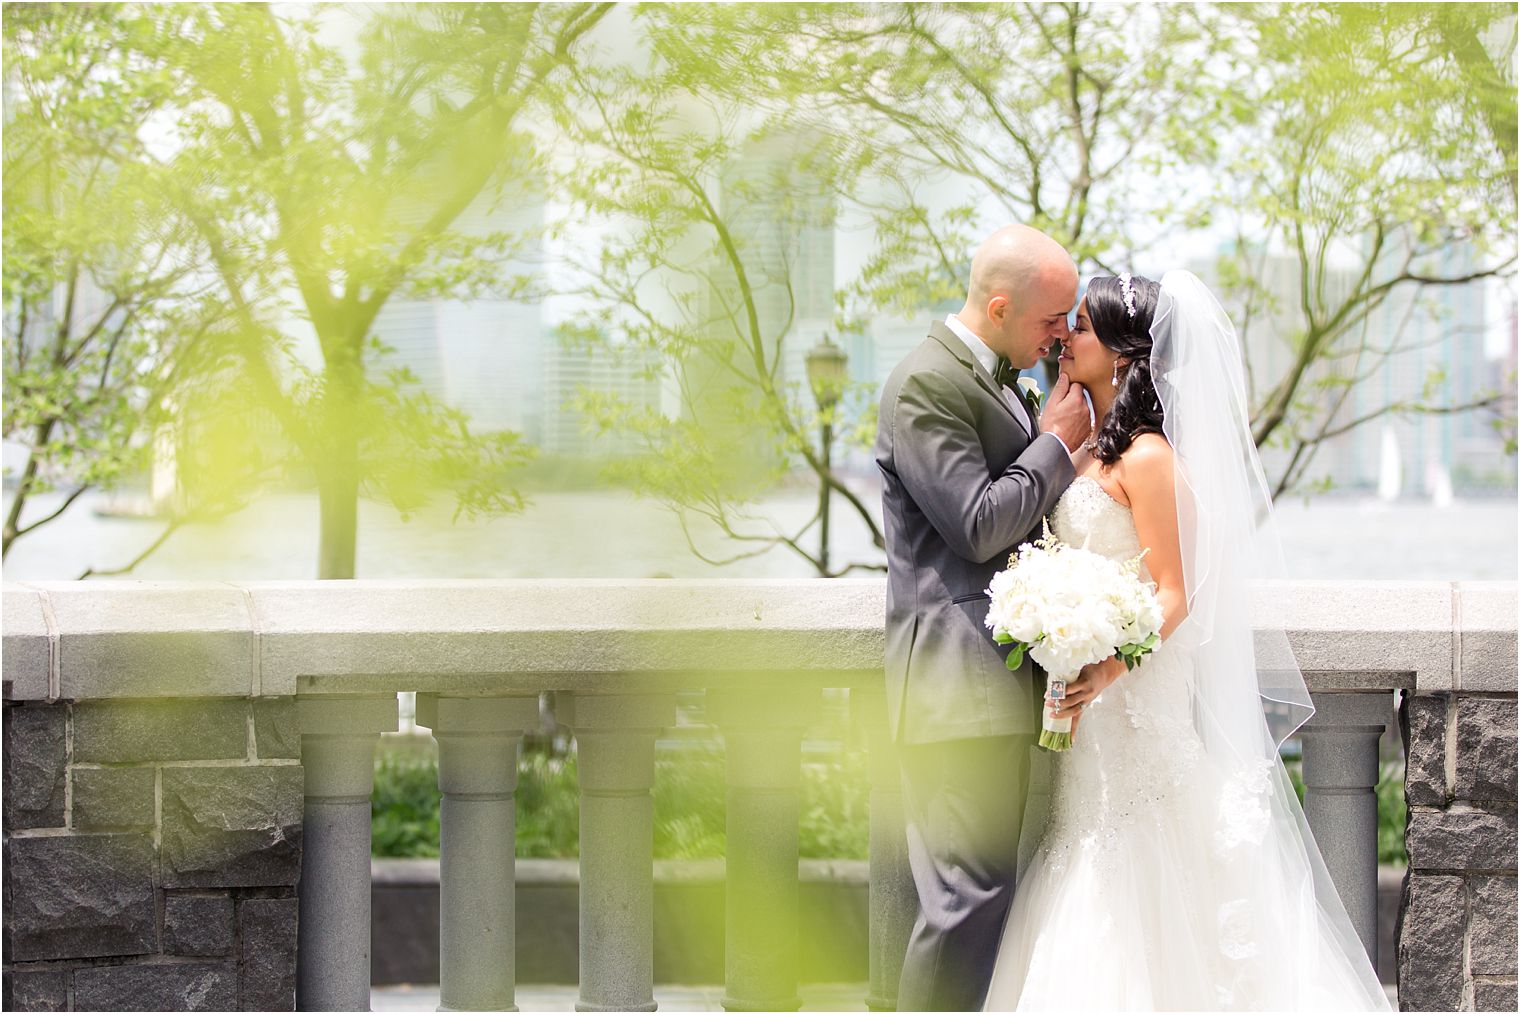 Romantic bride and groom photo at Riverview Terrace